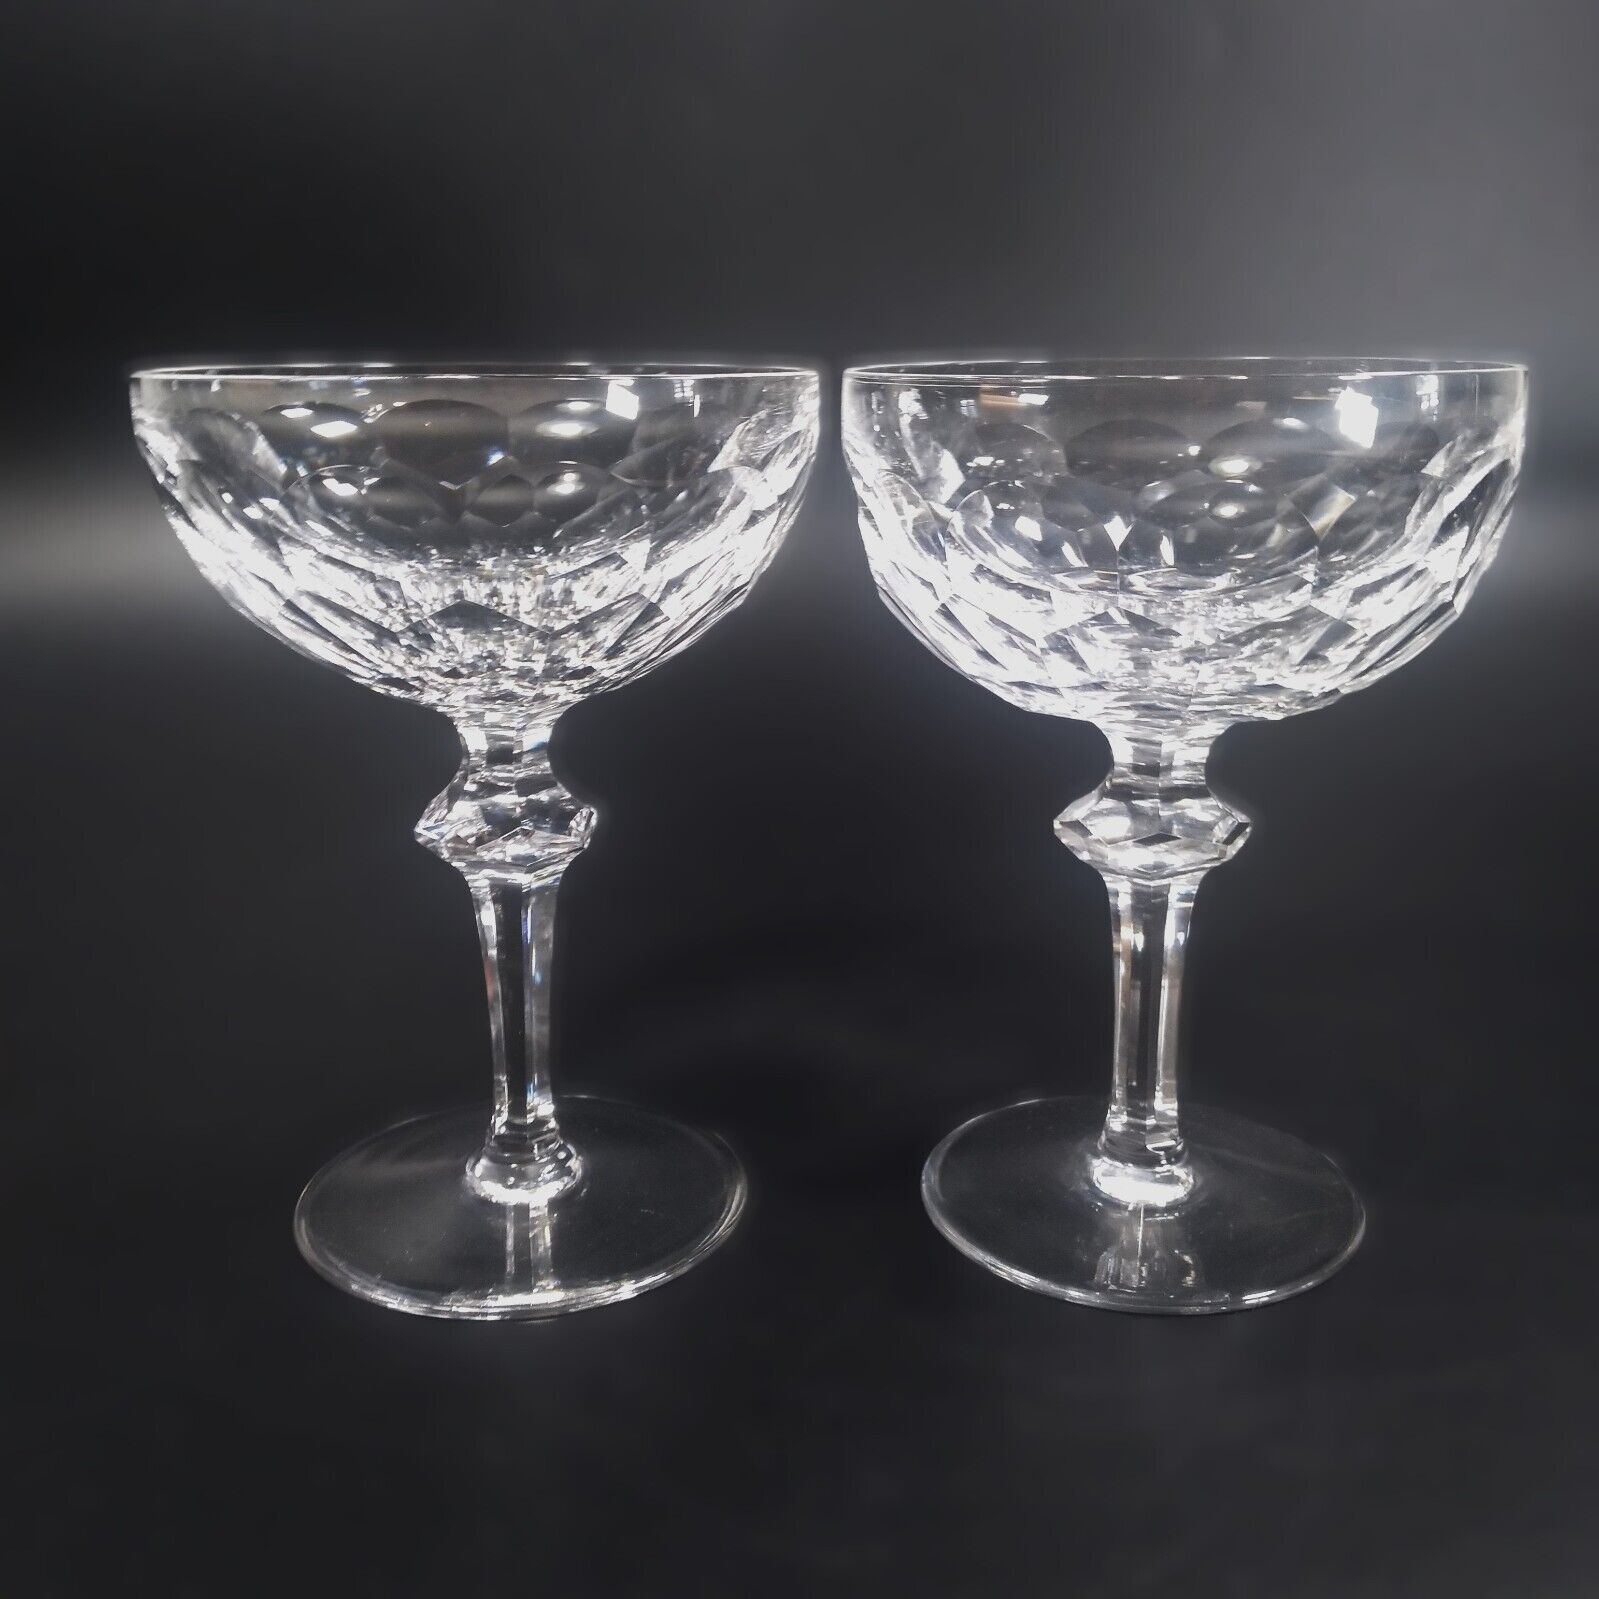 2 Waterford Curraghmore Crystal Champagne Tall Sherbet Goblets 2 Dings on Bases